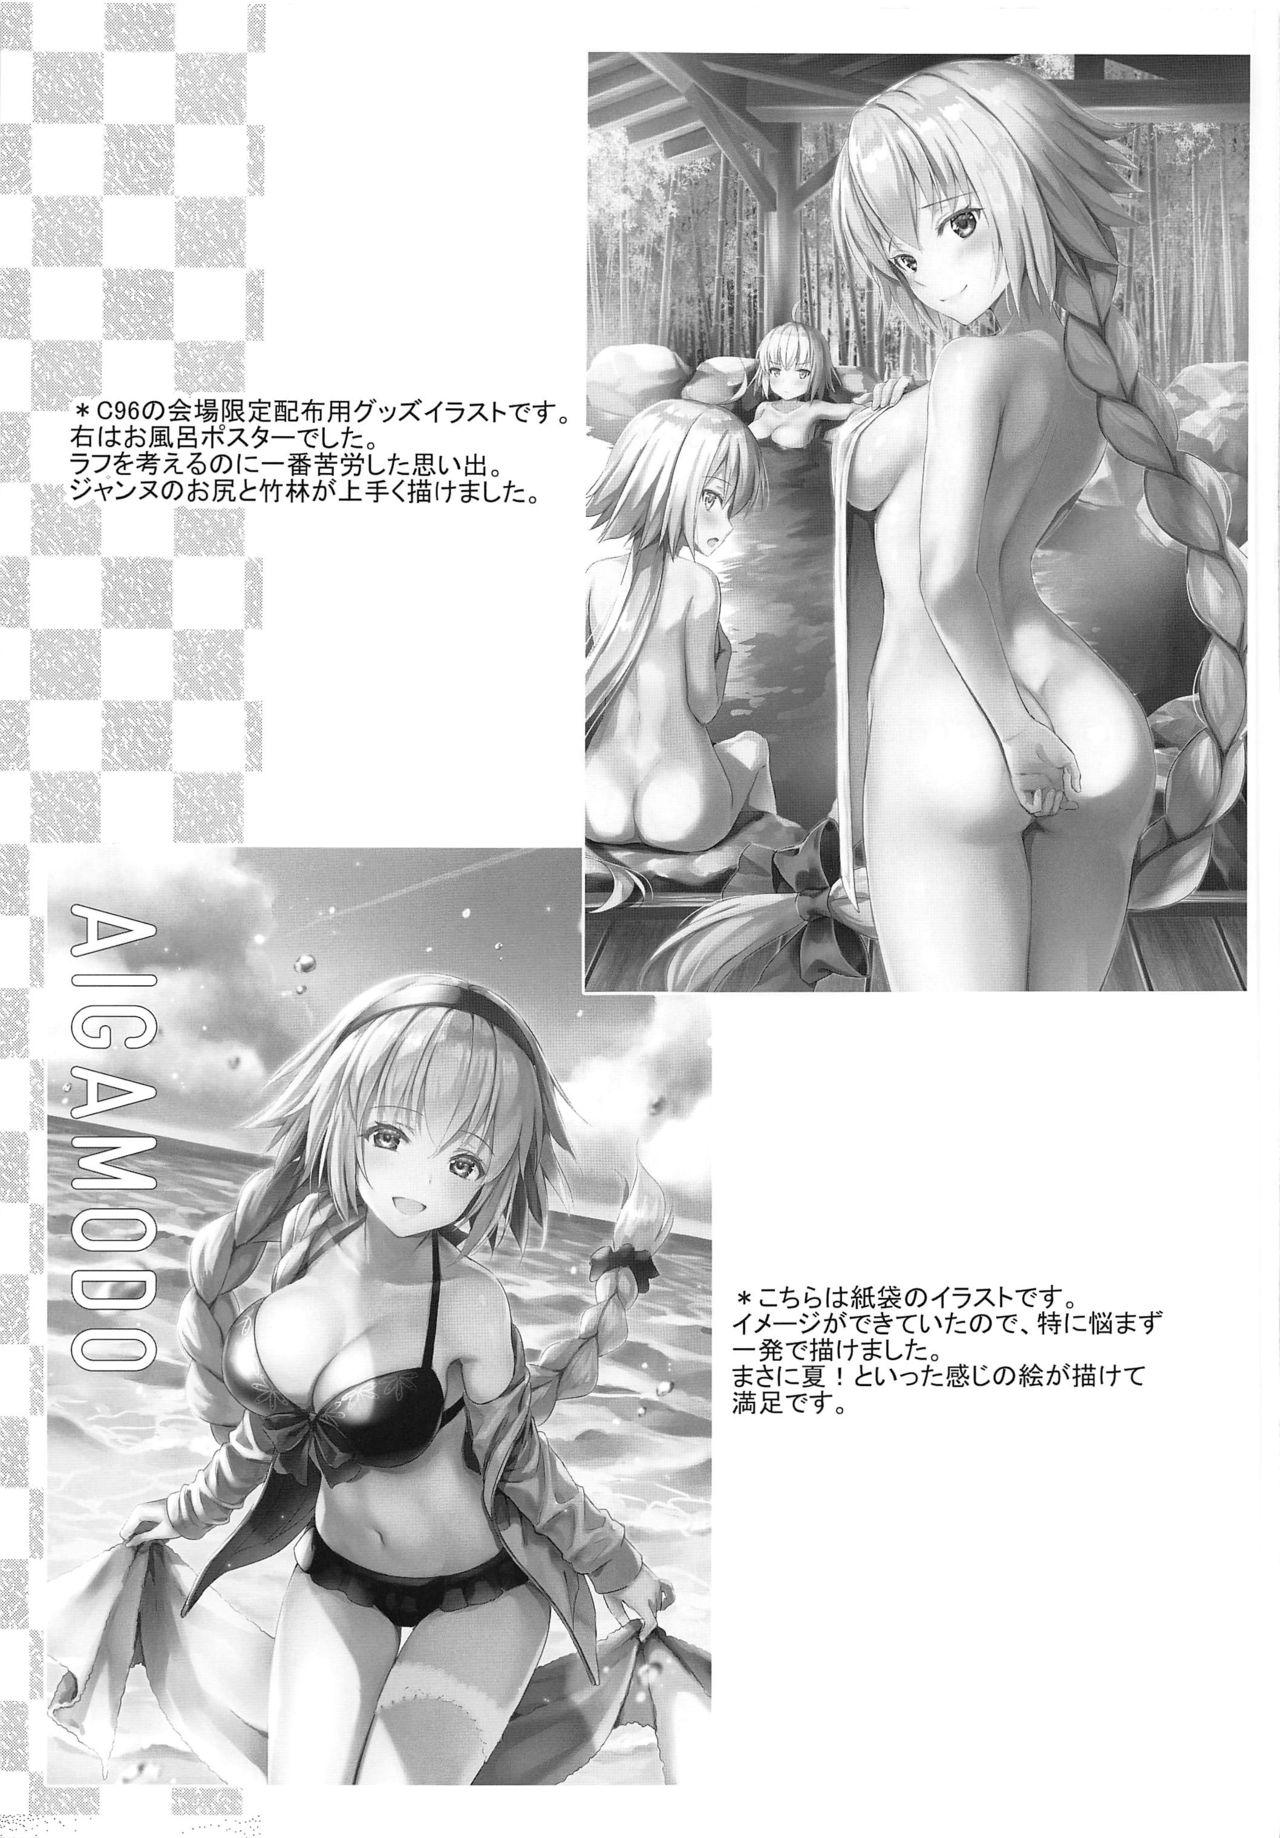 Banging Jeanne in Summer - Fate grand order Deep Throat - Page 36